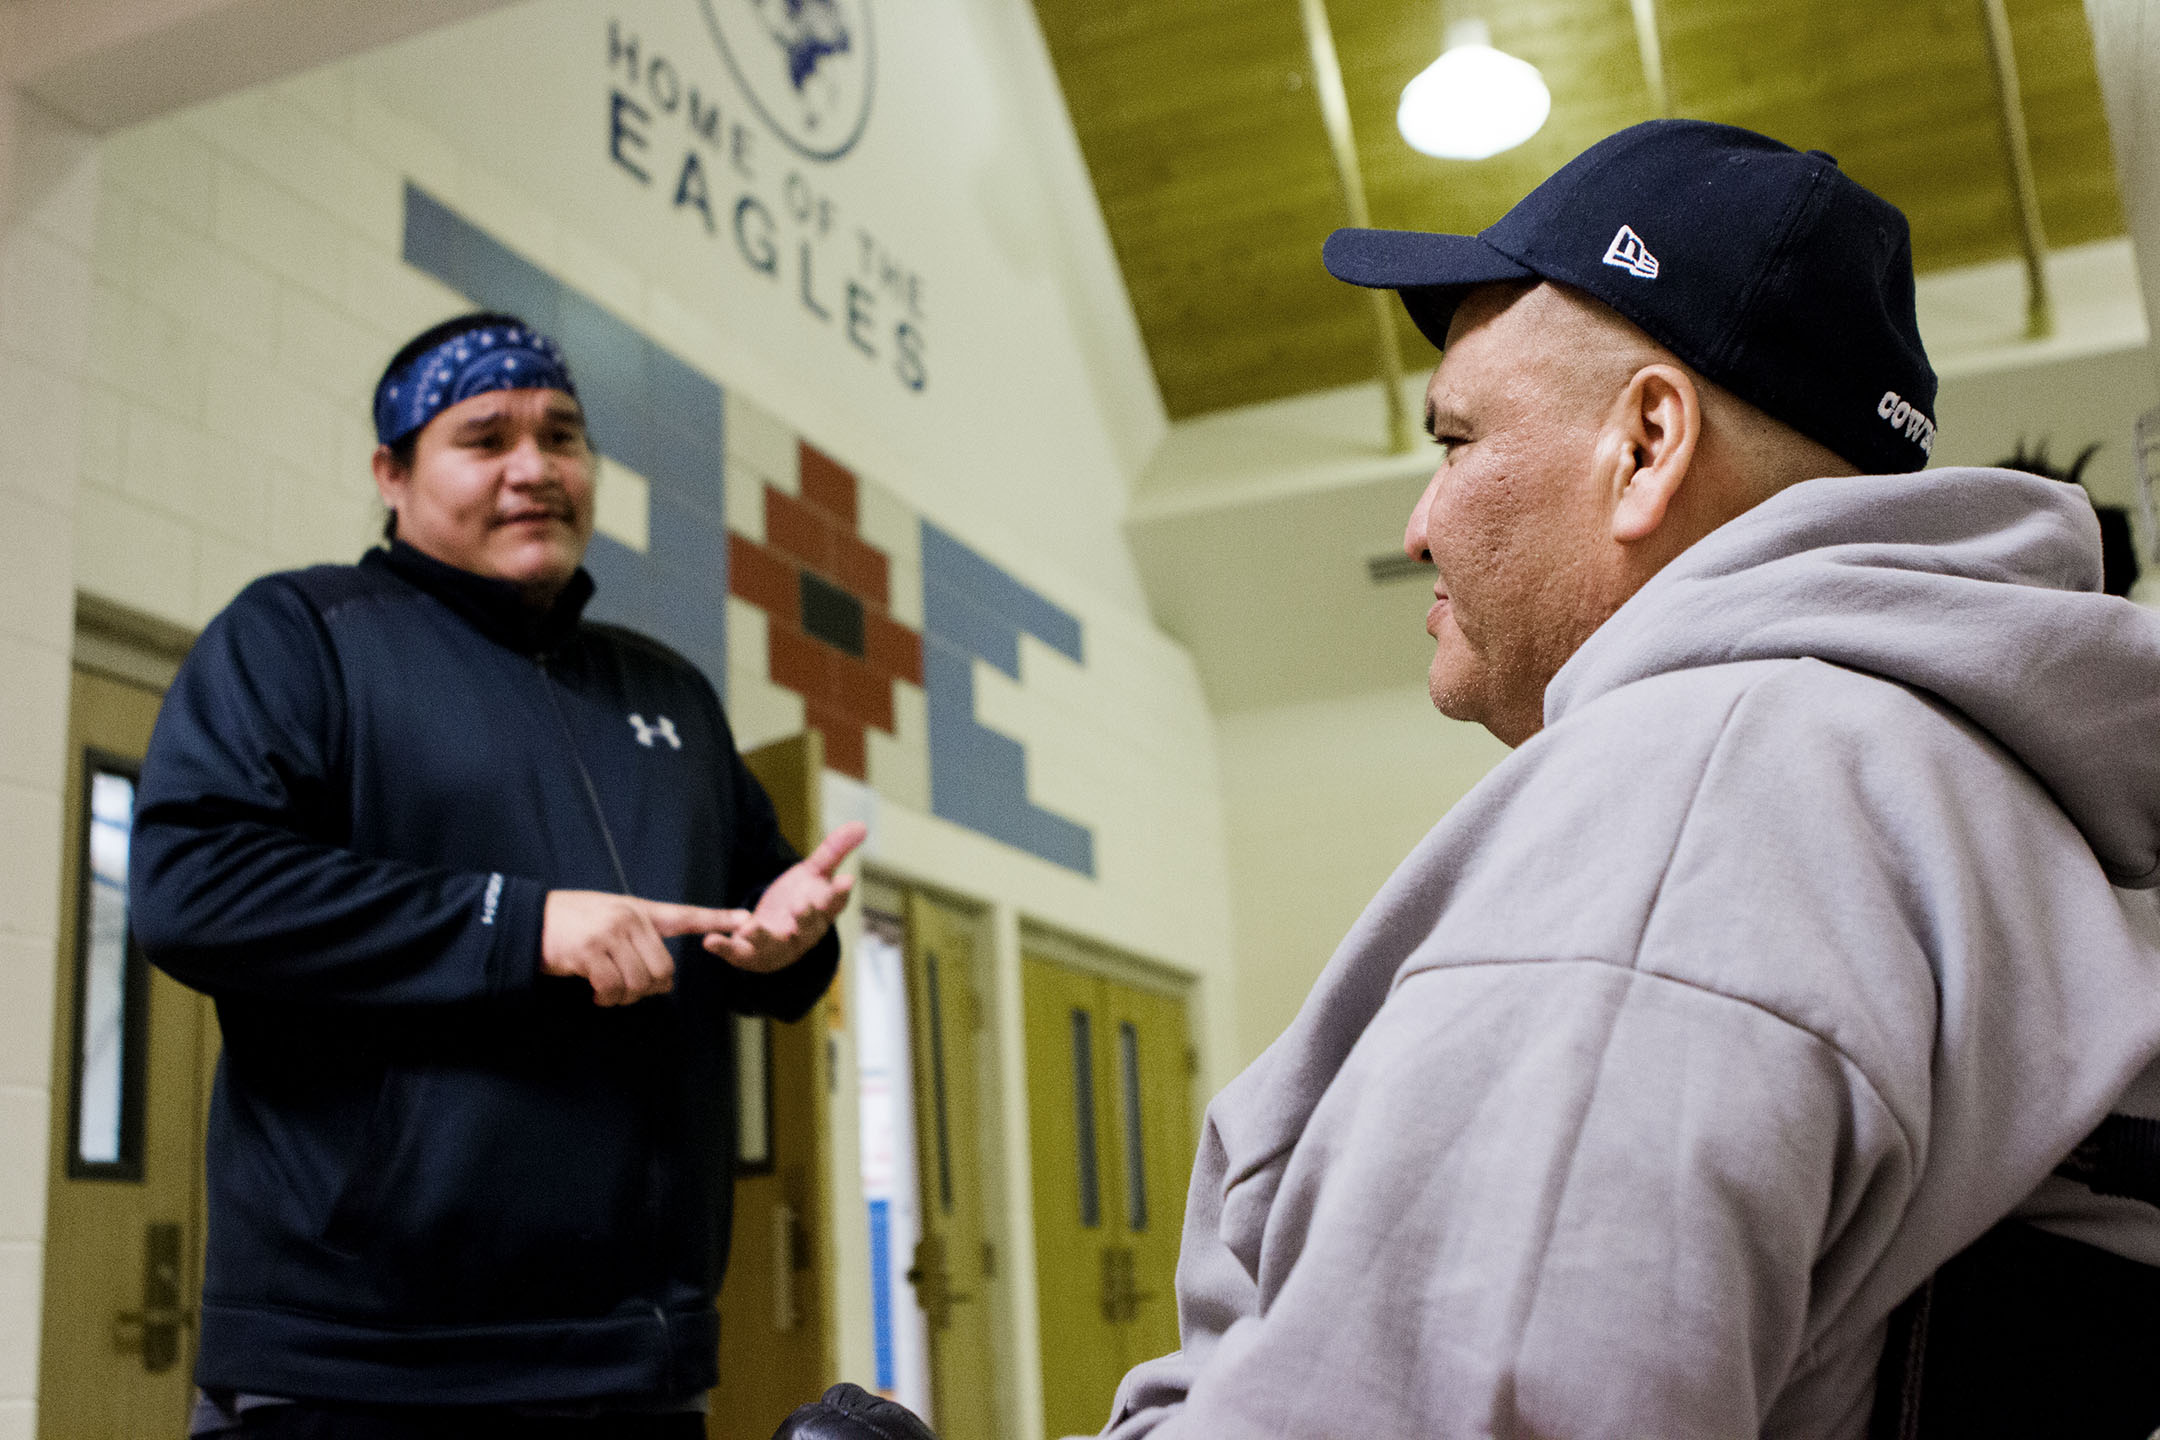 Tribal President Jace Killsback speaks to Jay D Old Mouse about the differences between what Northern Cheyenne dialysis patients want, and what the tribal council sees as a realistic investment in diabetes prevention on the reservation.